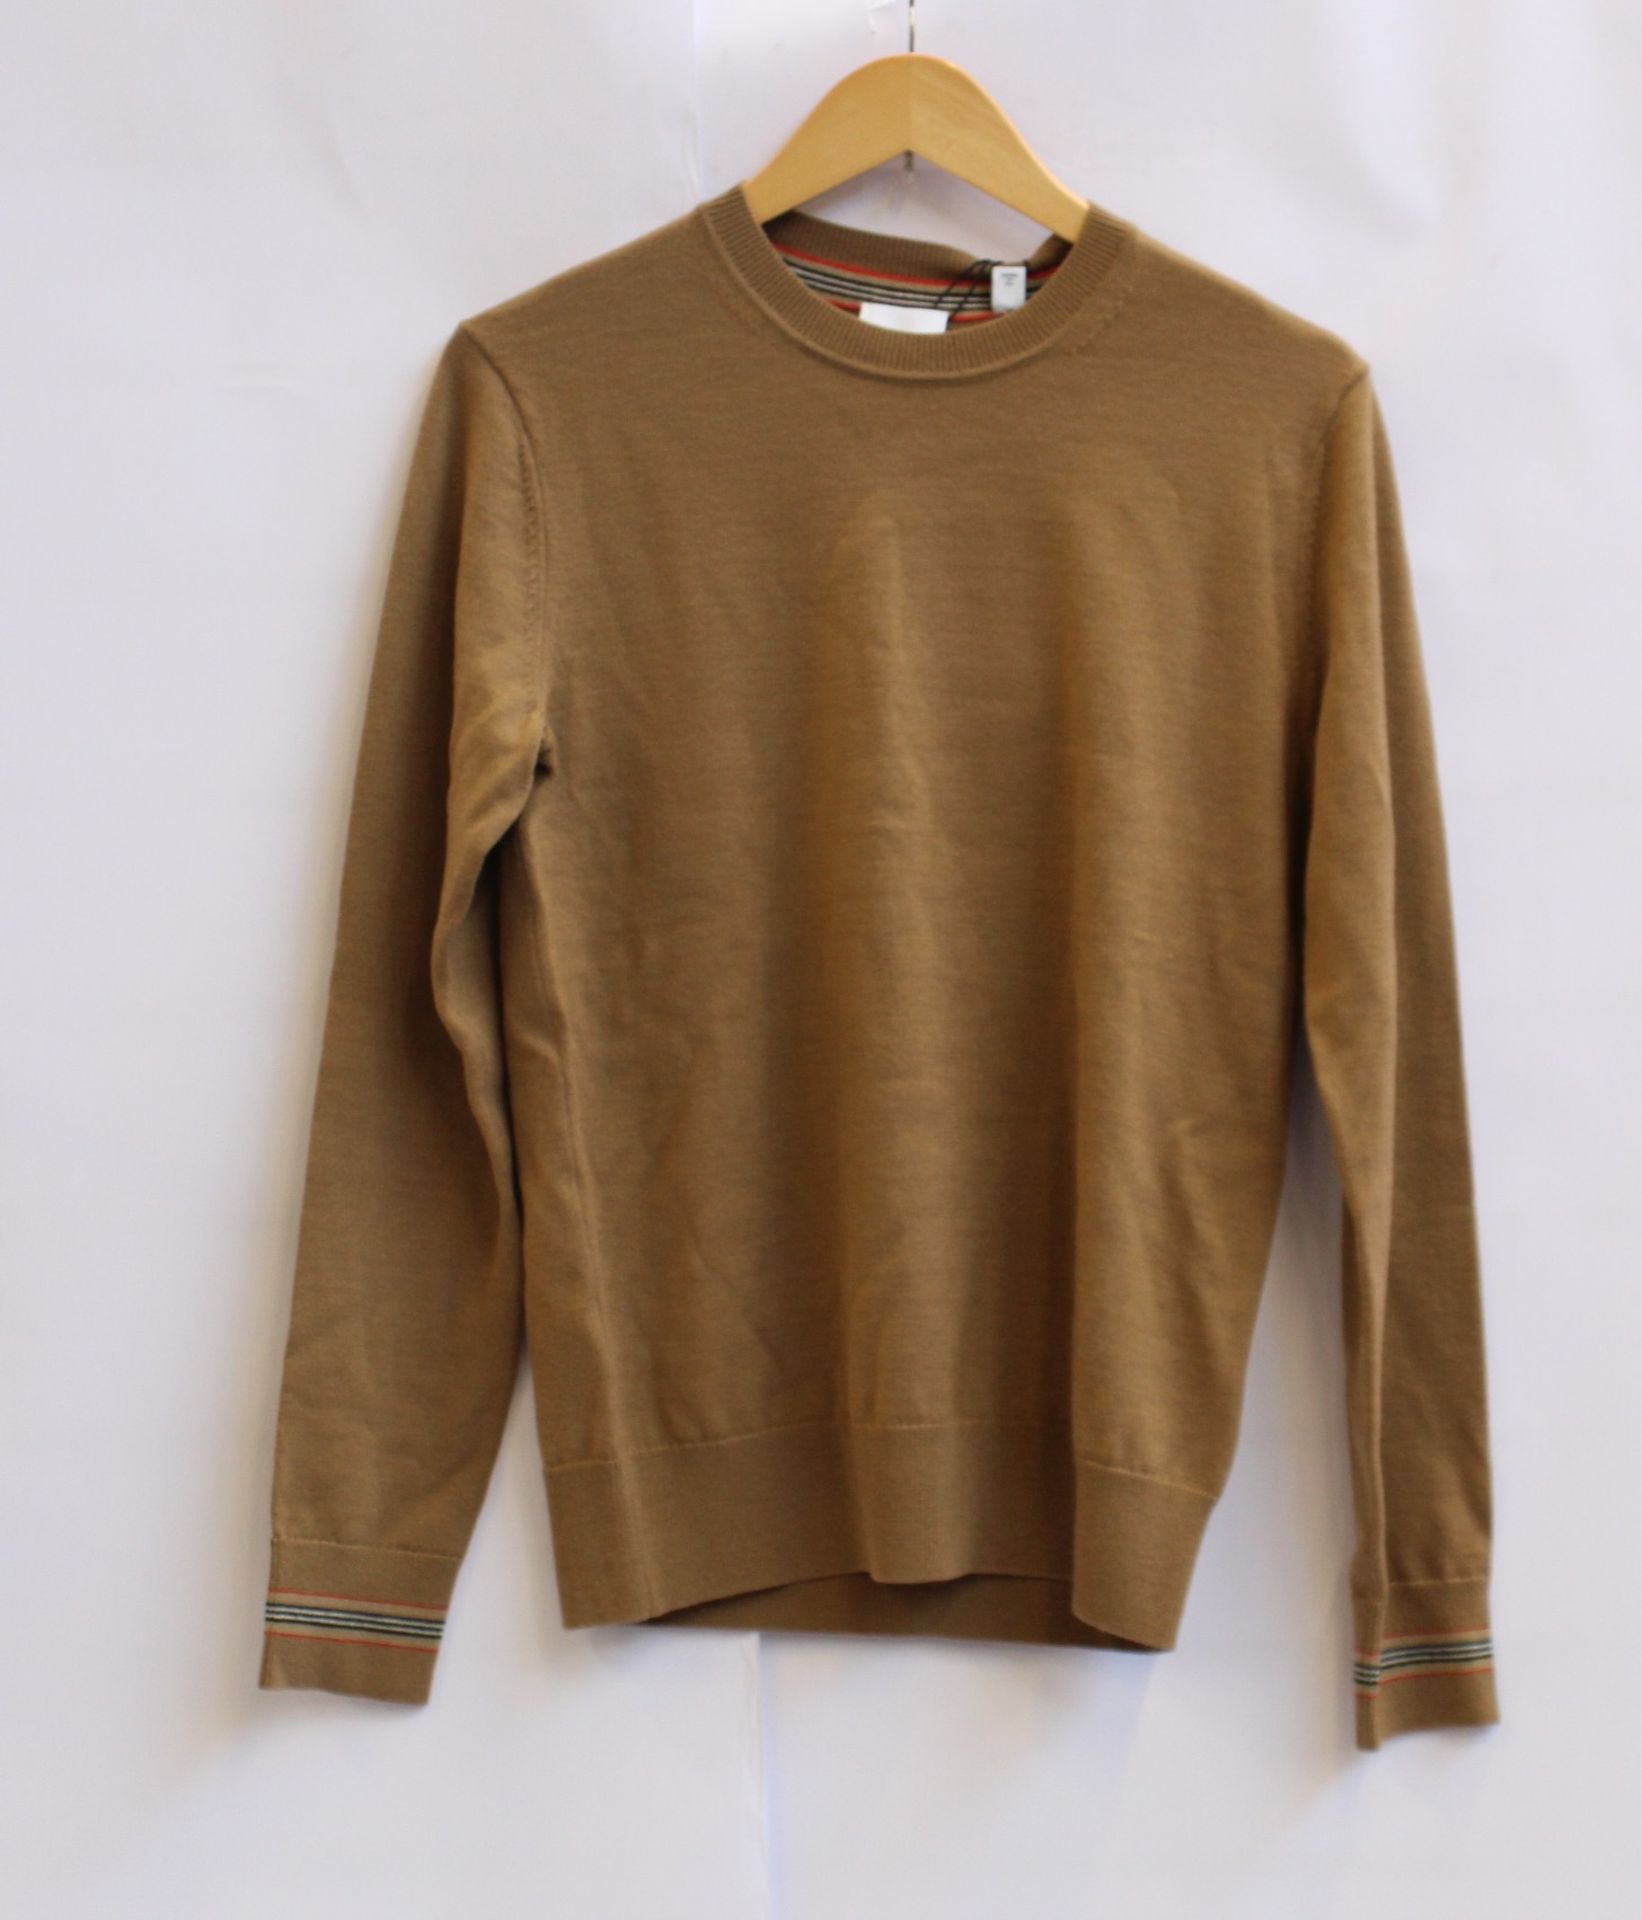 An as new Burberry brown sweater (XS).